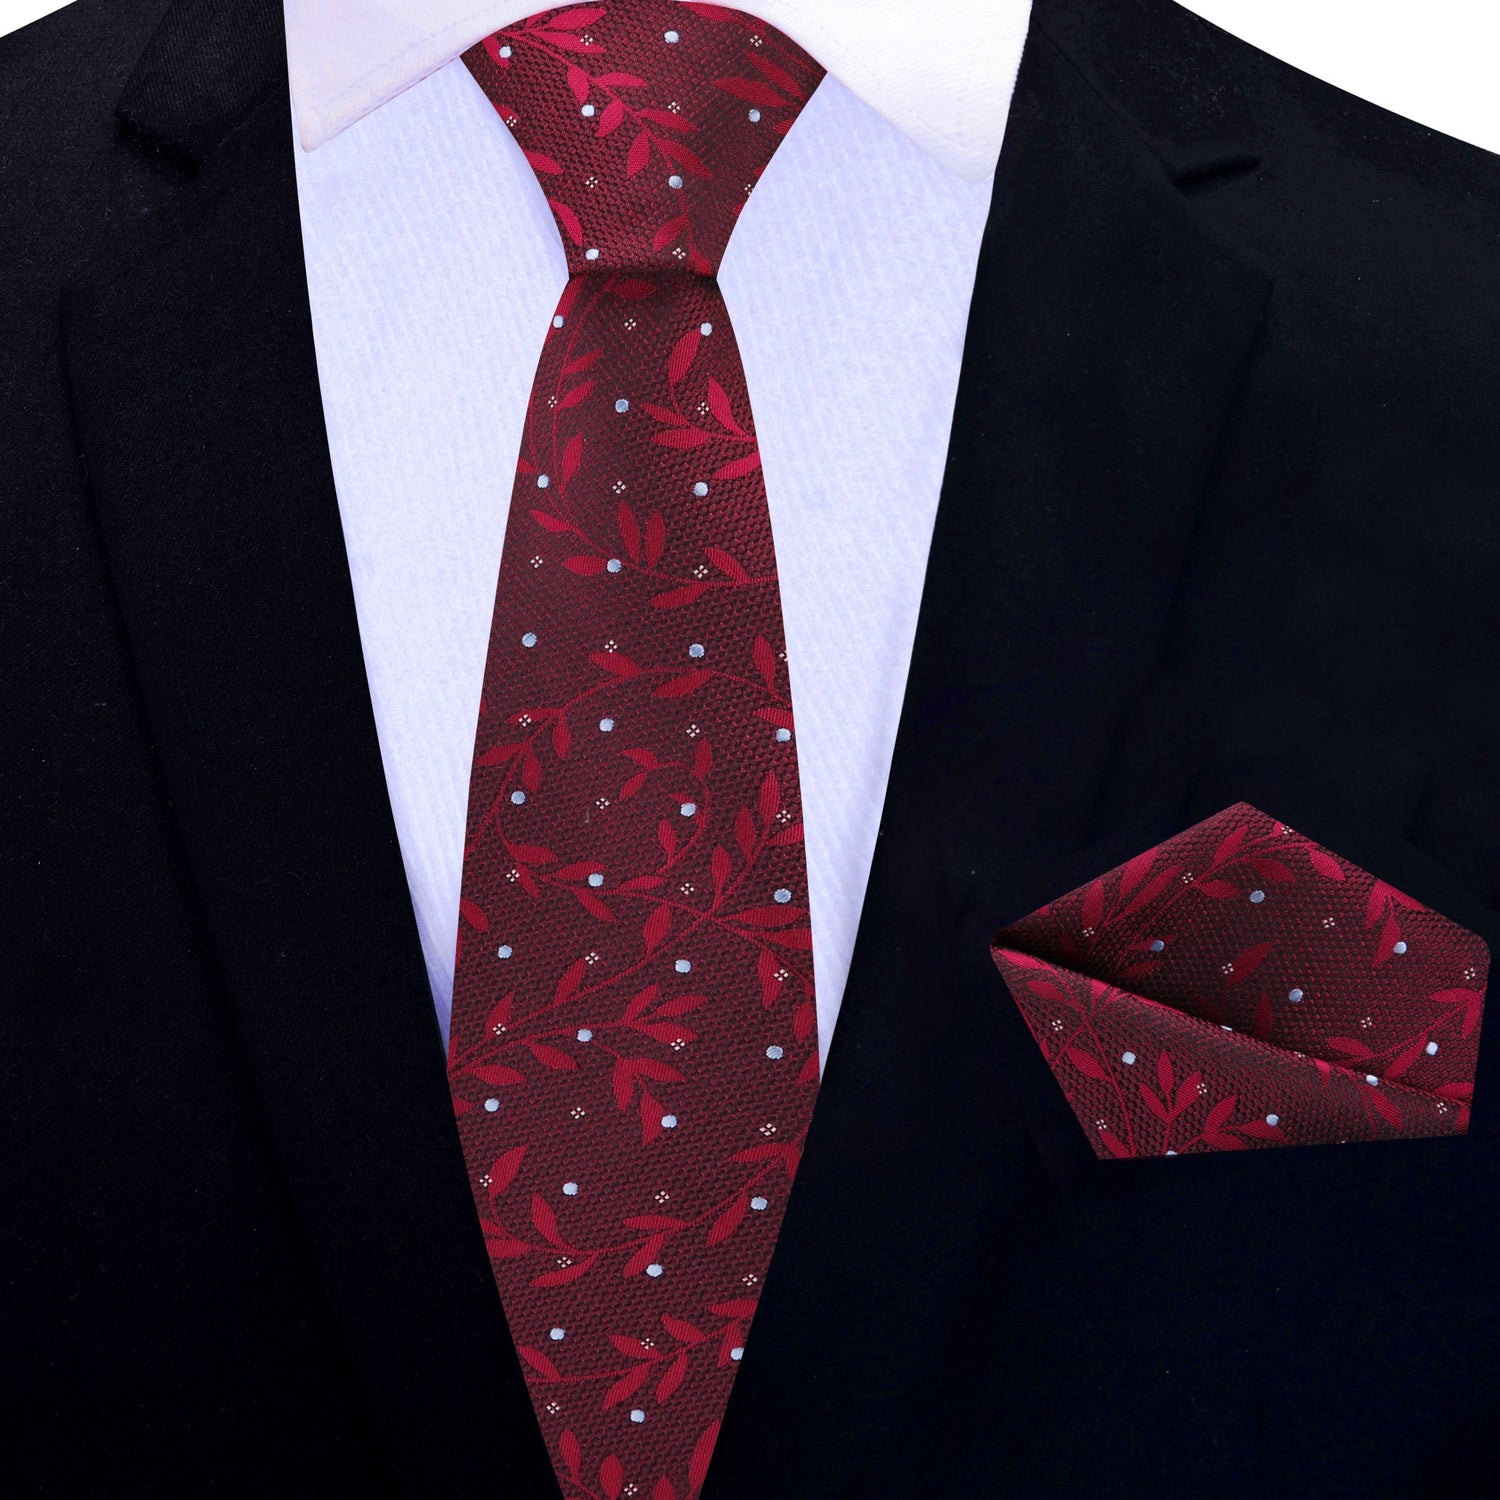 Thin Tie: Deep Red Vines Necktie with Matching Pocket Square